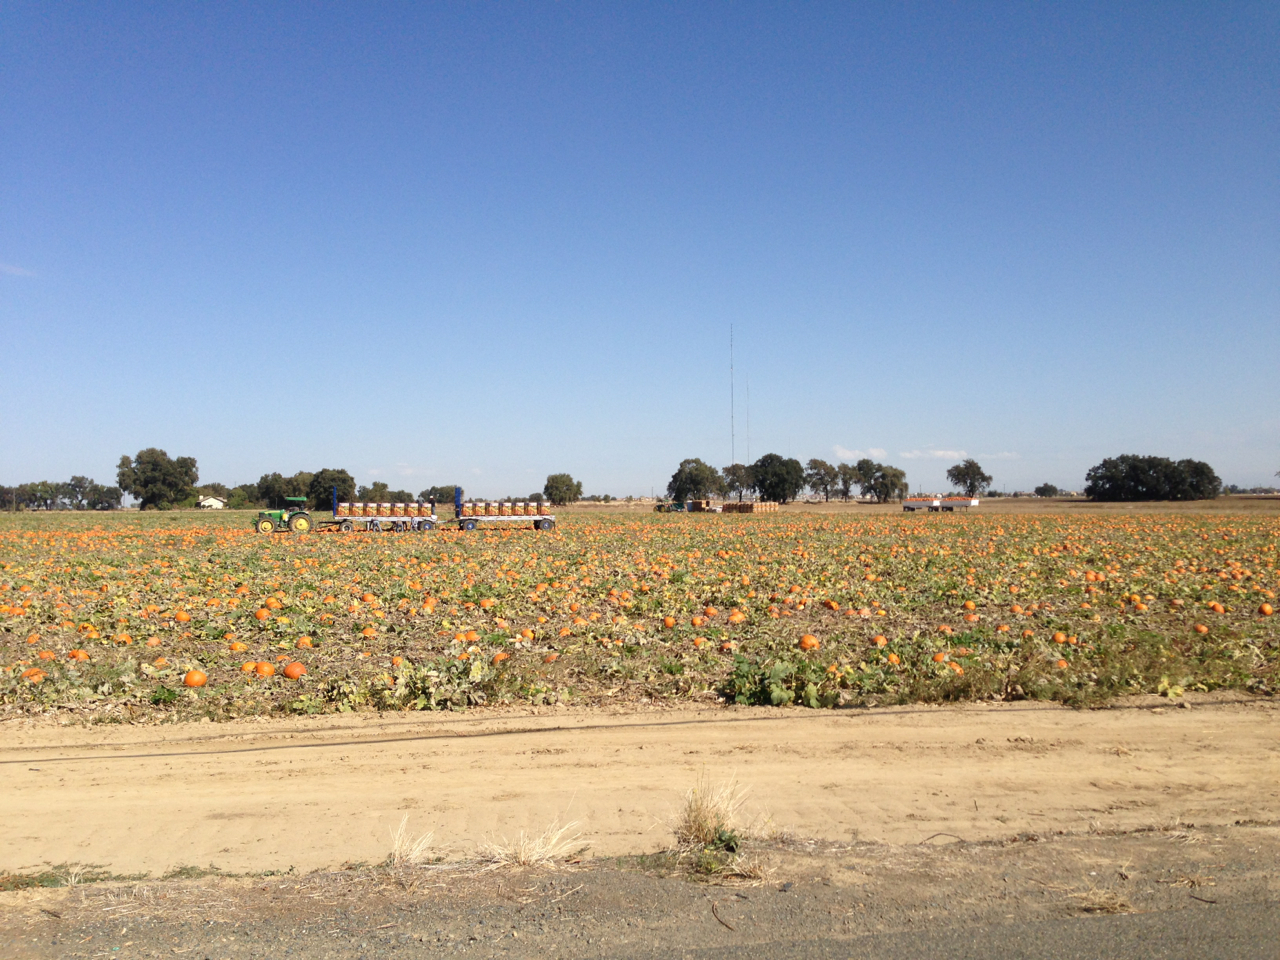 wide shot of a pumpkin field filled with pumpkins on the ground